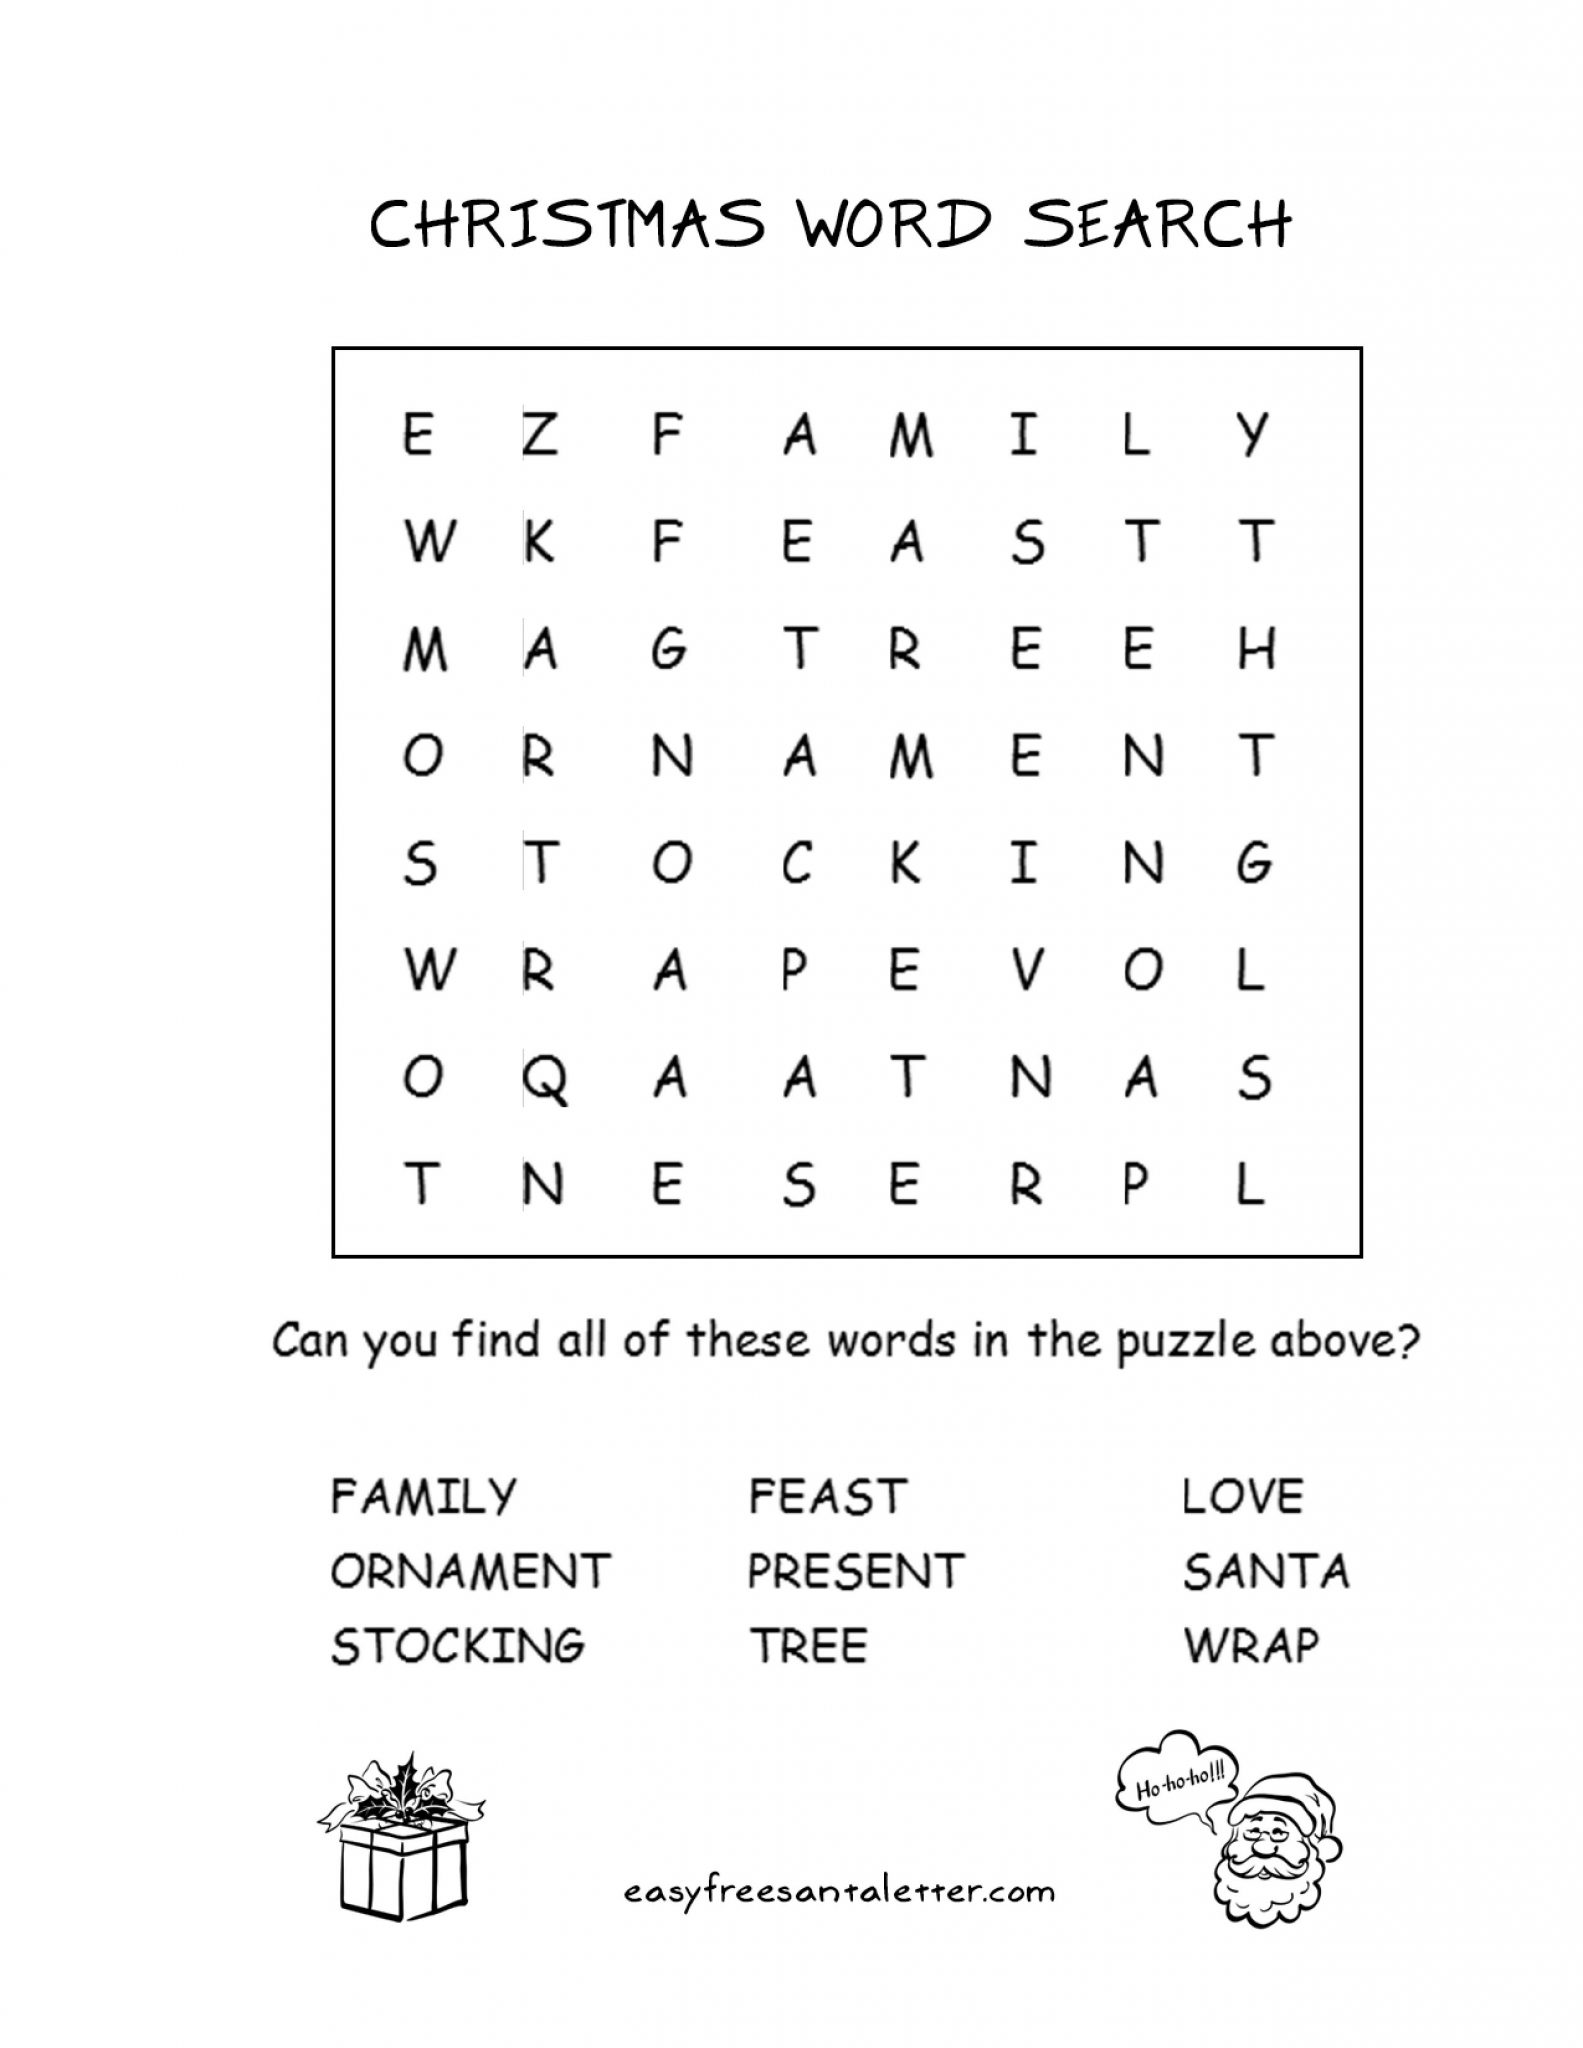 easy-free-letter-from-santa-magical-package-christmas-word-word-search-printable